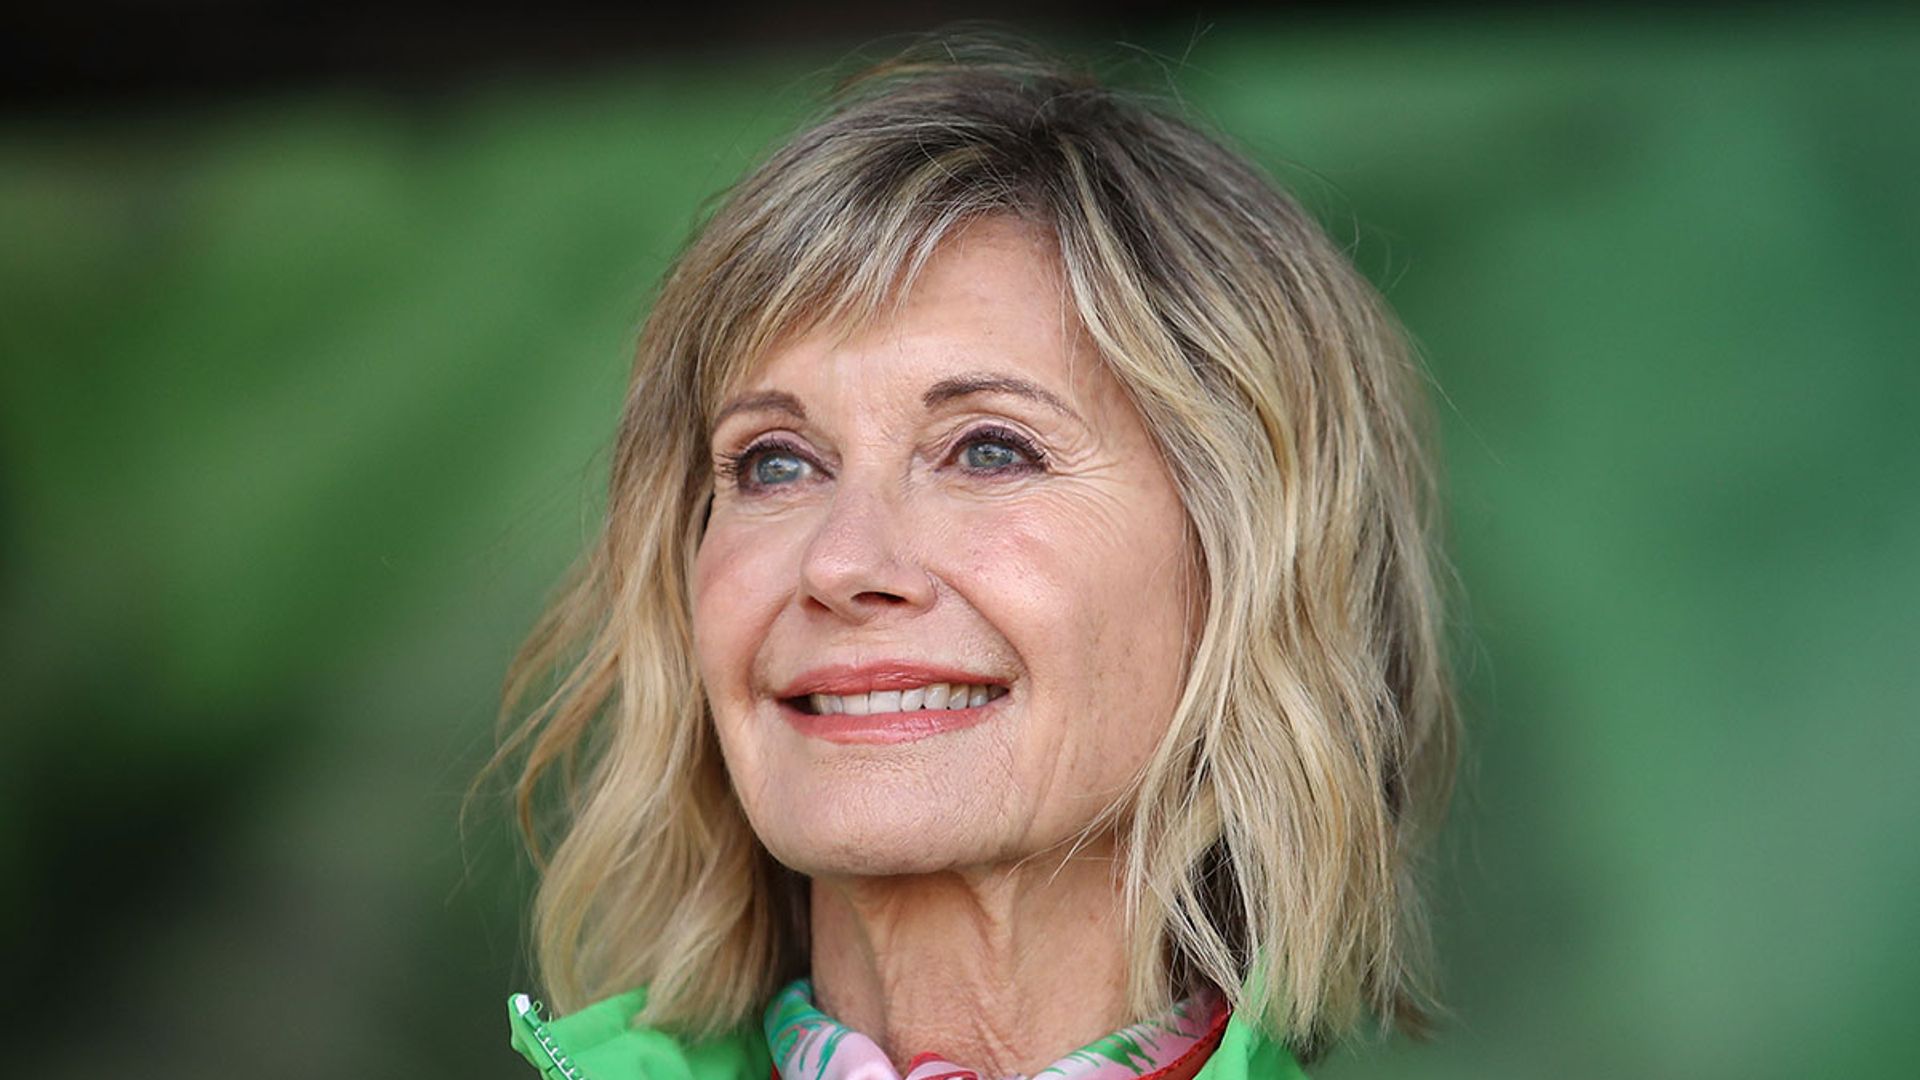 Olivia Newton-John comforted by fans as she shares heartbreaking news